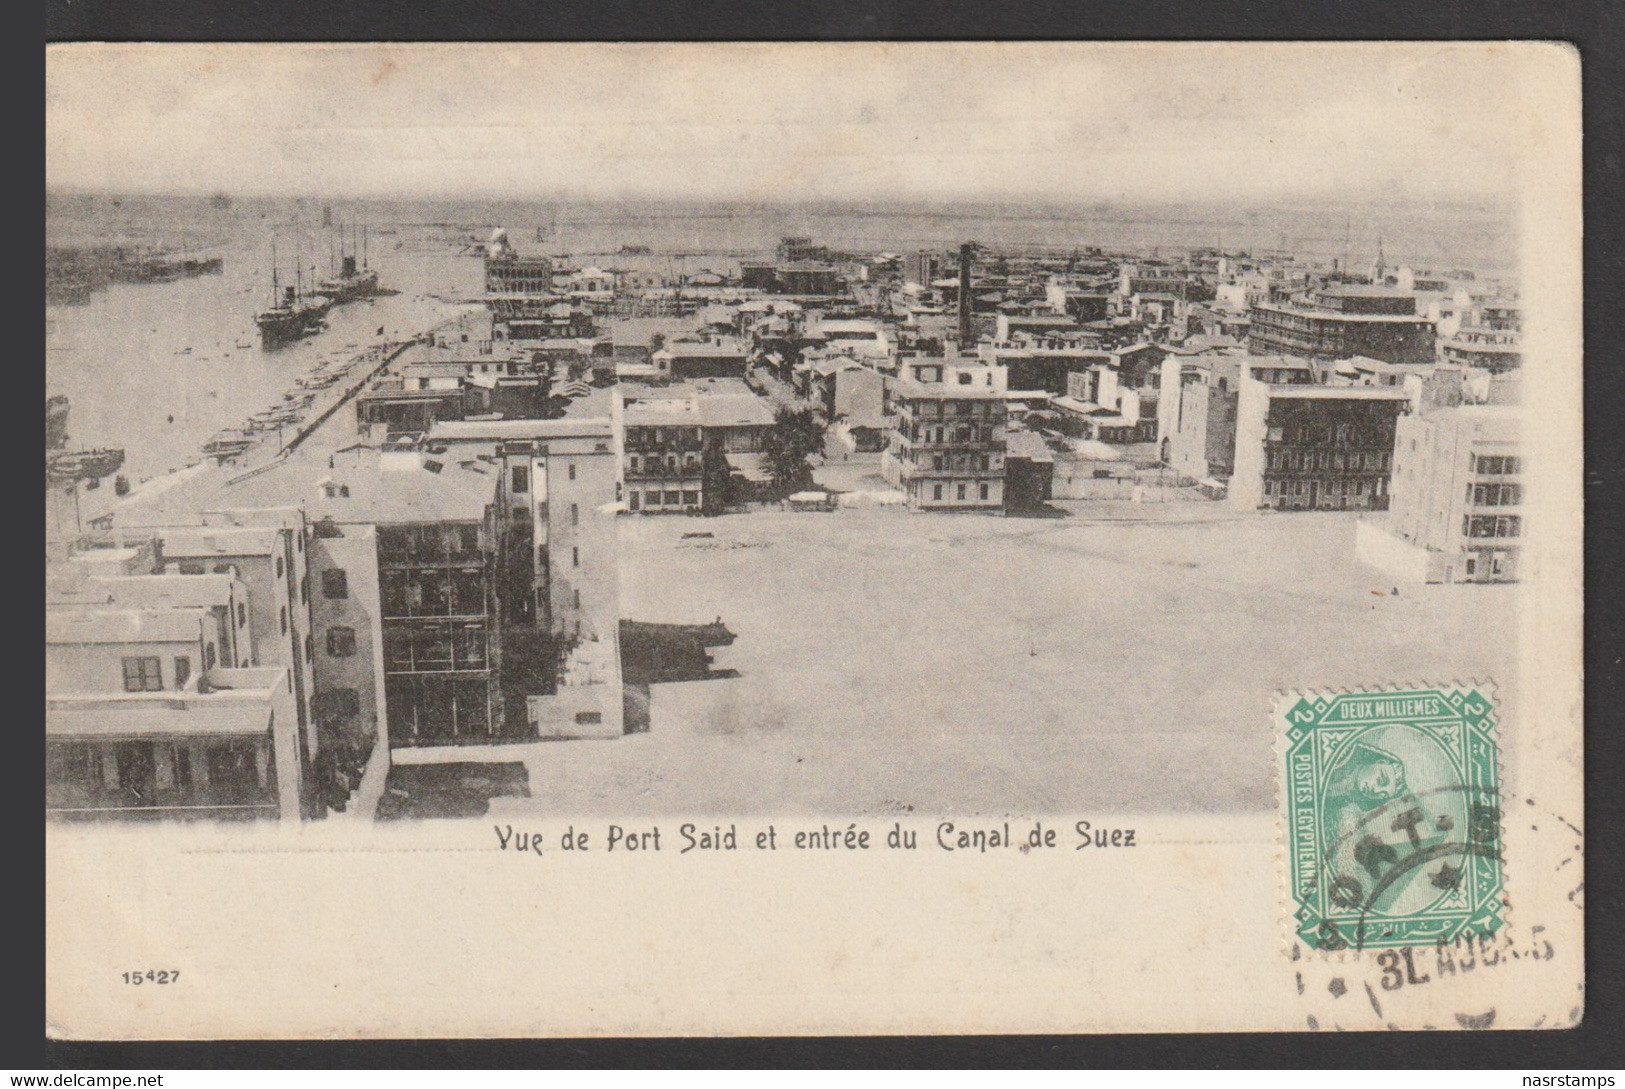 Egypt - Rare - Vintage Post Card - View Of Port Said And Entrance To The Suez Canal - 1866-1914 Ägypten Khediva